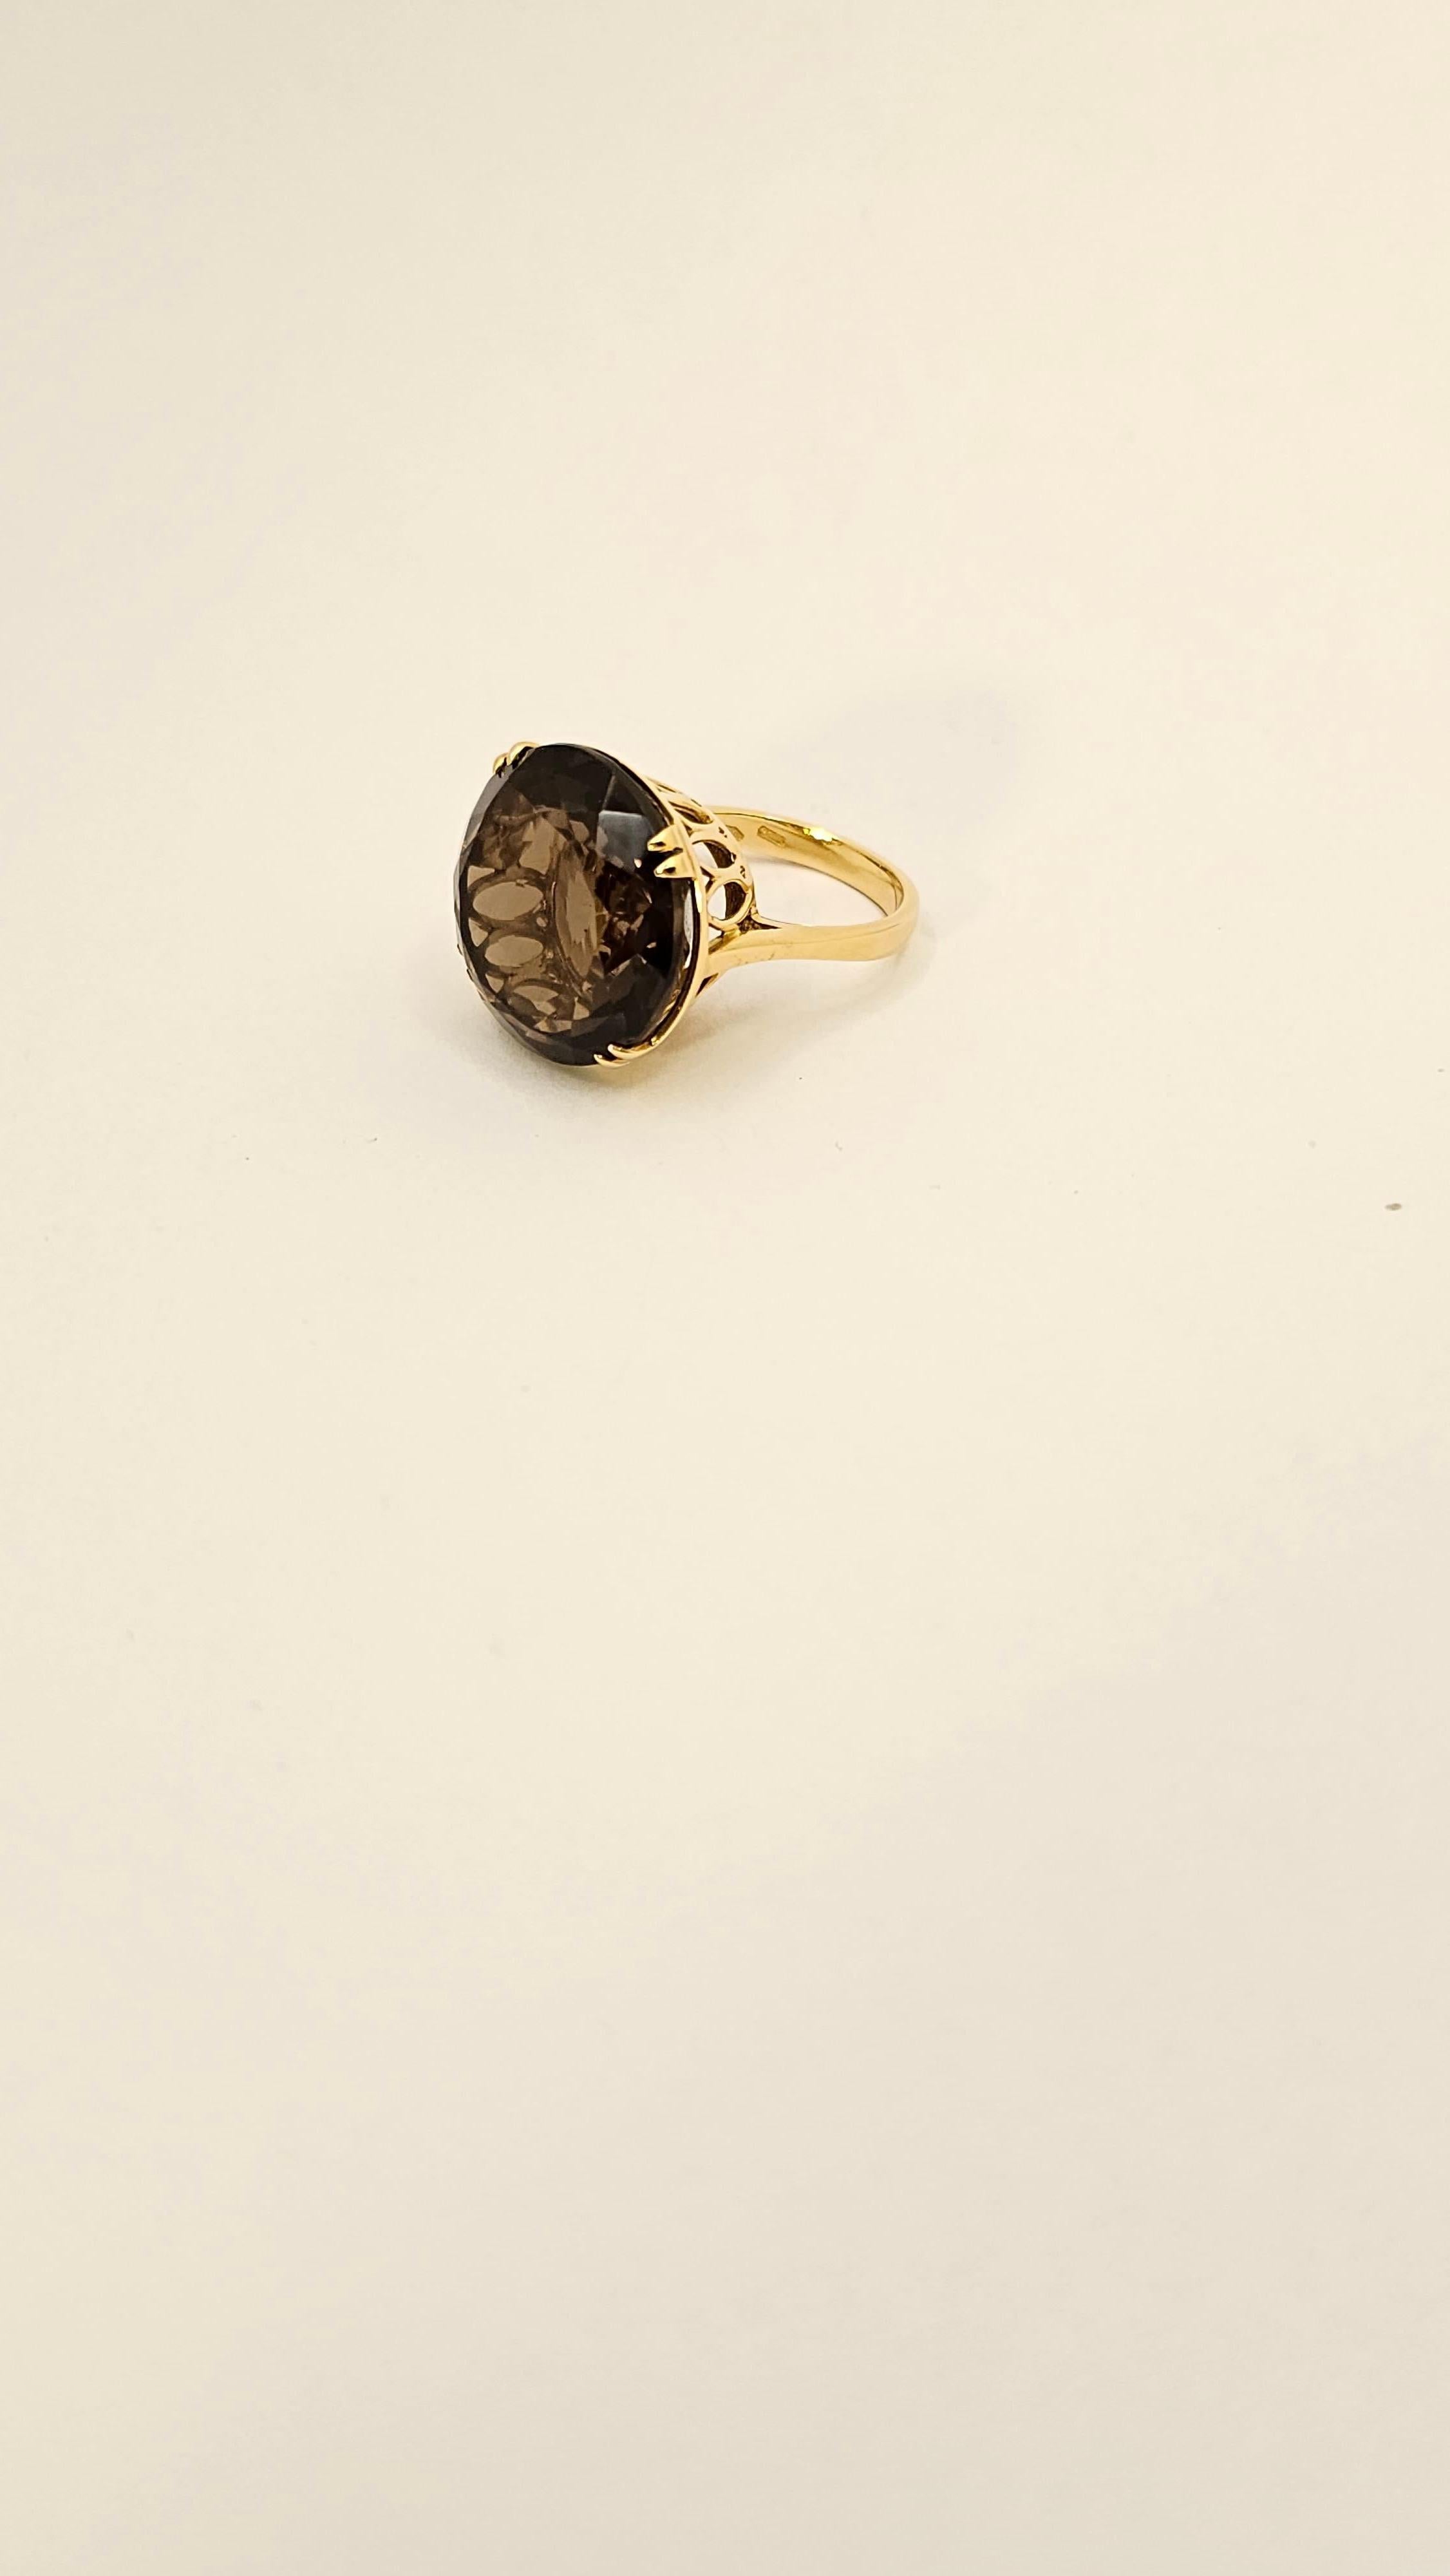 An 18 kt yellow gold, solid ring with a retro style but contemporary dimensions.
The stone is a smoky Quartz. It has a fairly soft brown color that is absolutely unique and goes well with any complexion.
The diameter of this stone is 20 mm and it